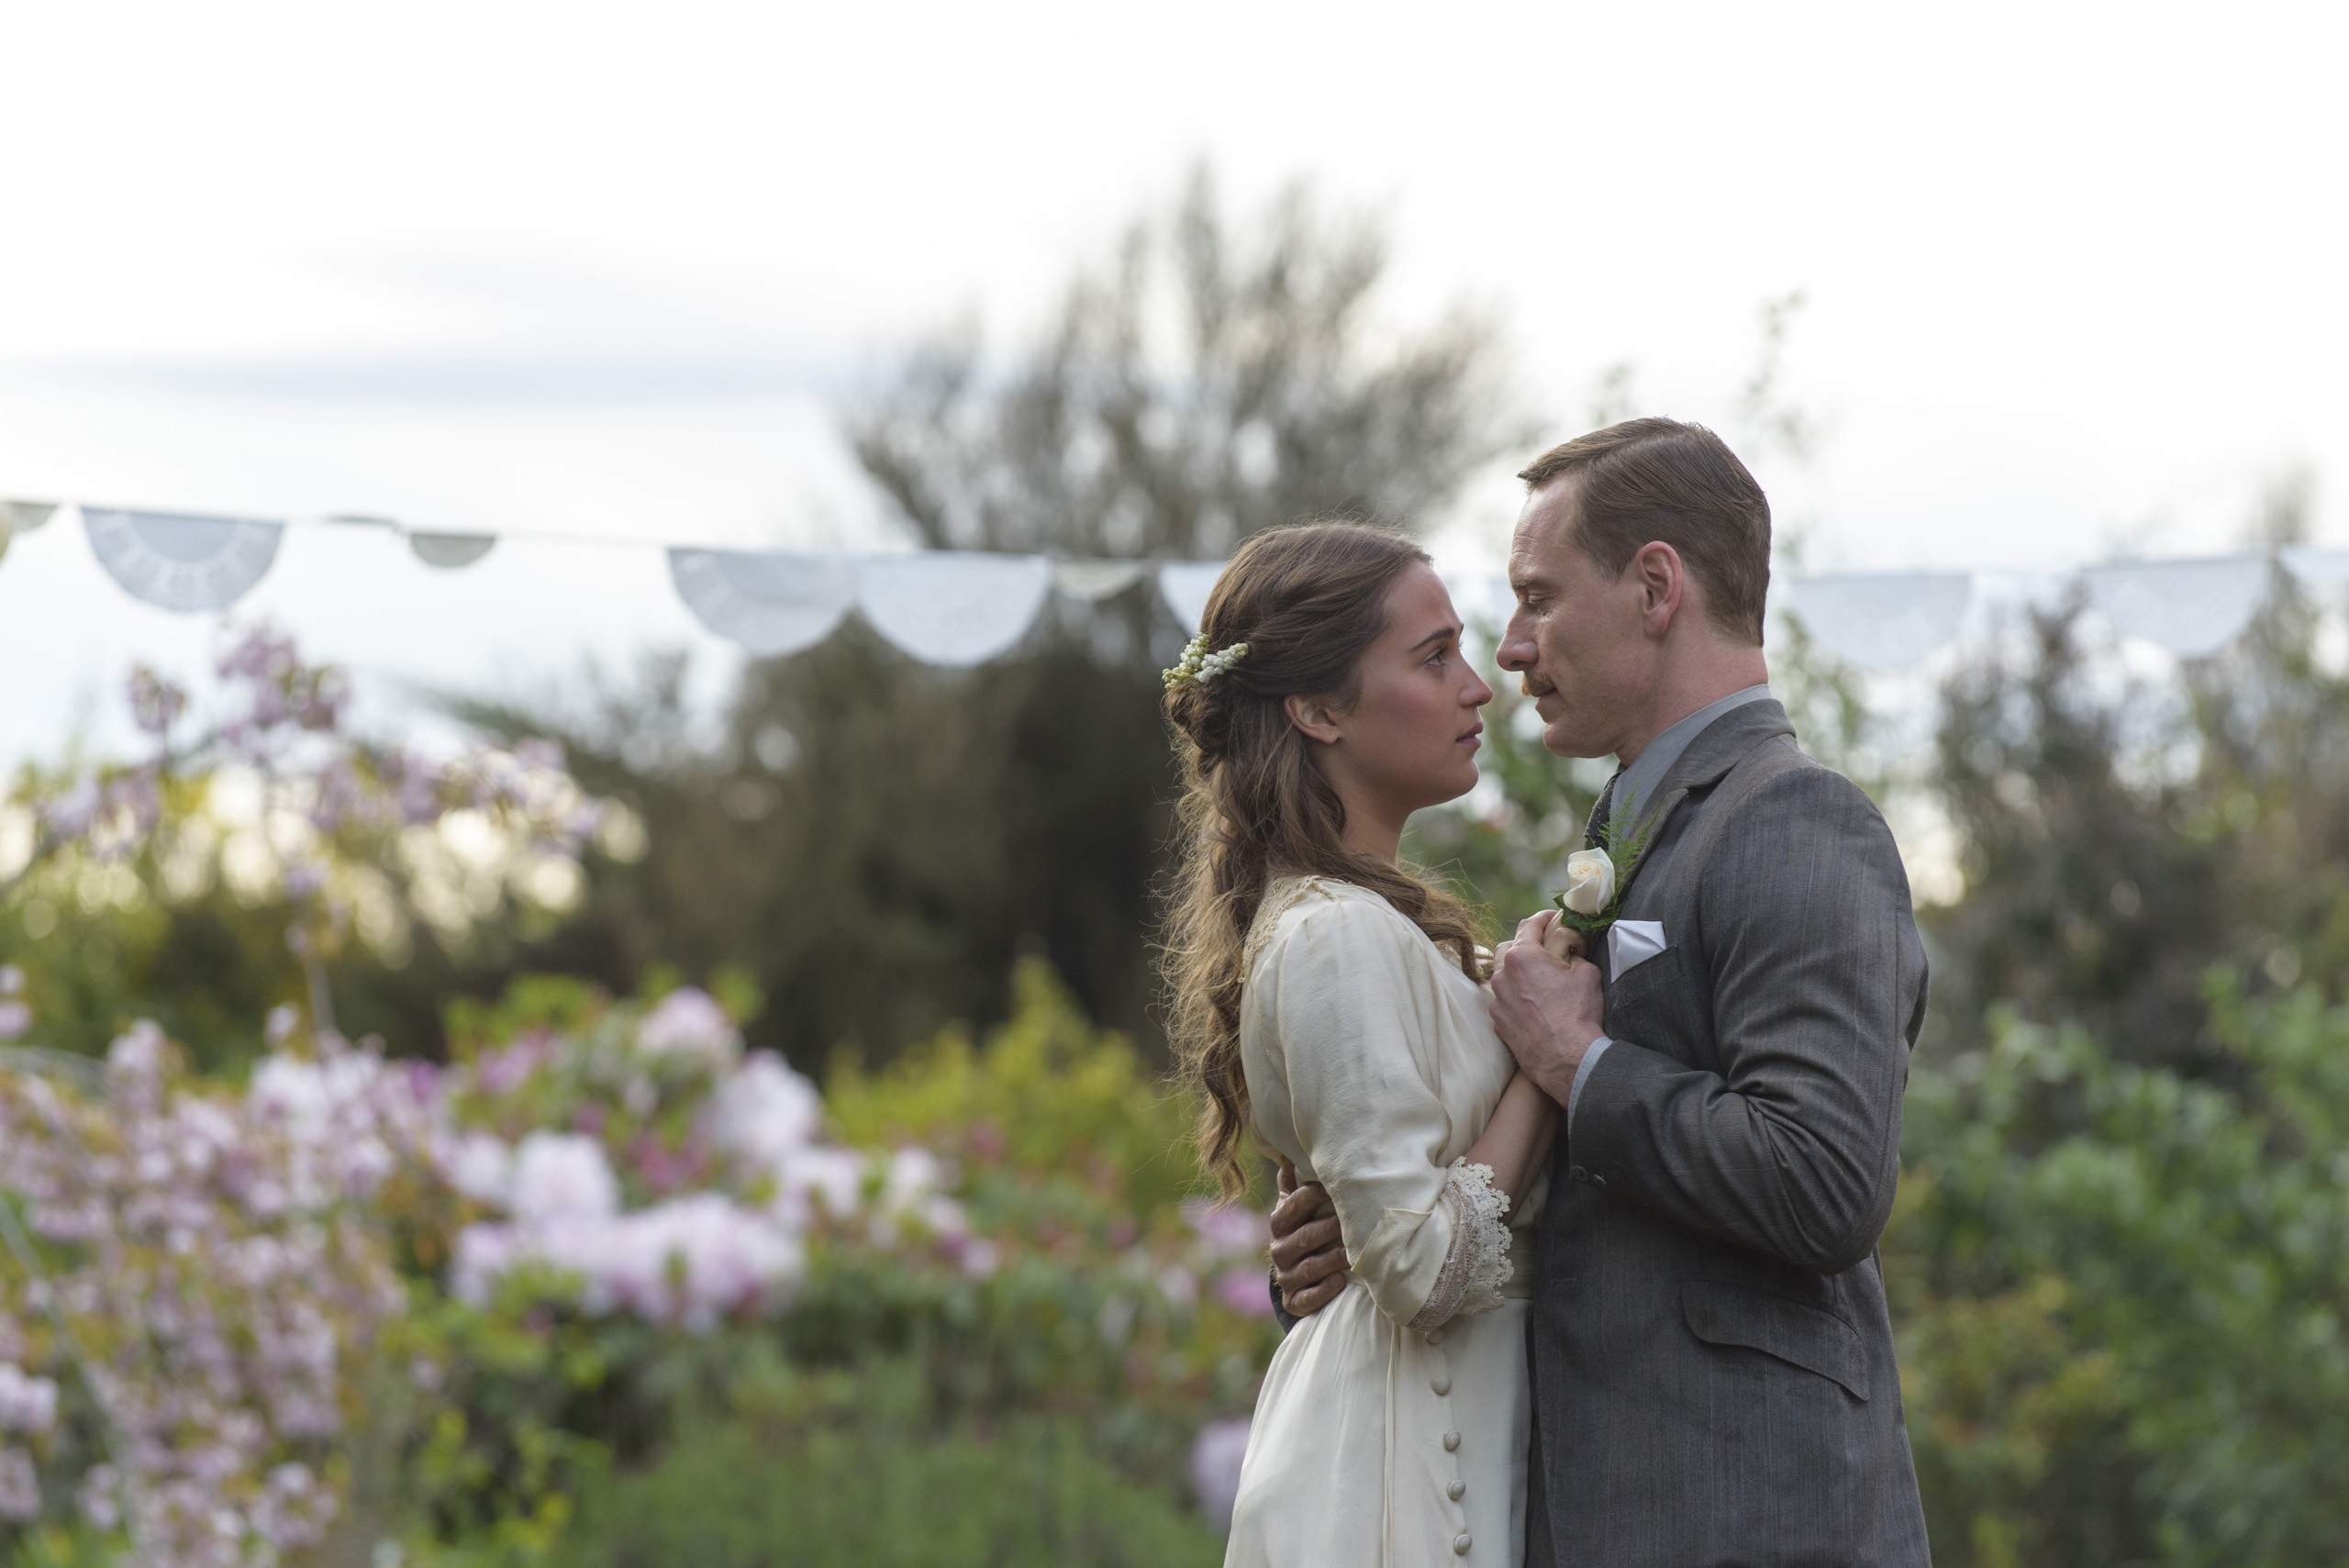 Michael Fassbender stars as Tom Sherbourne and Alicia Vikander as his wife Isabel in DreamWorks Pictures poignant drama "The Light Between Oceans." (Davi Russo—DreamWorks)